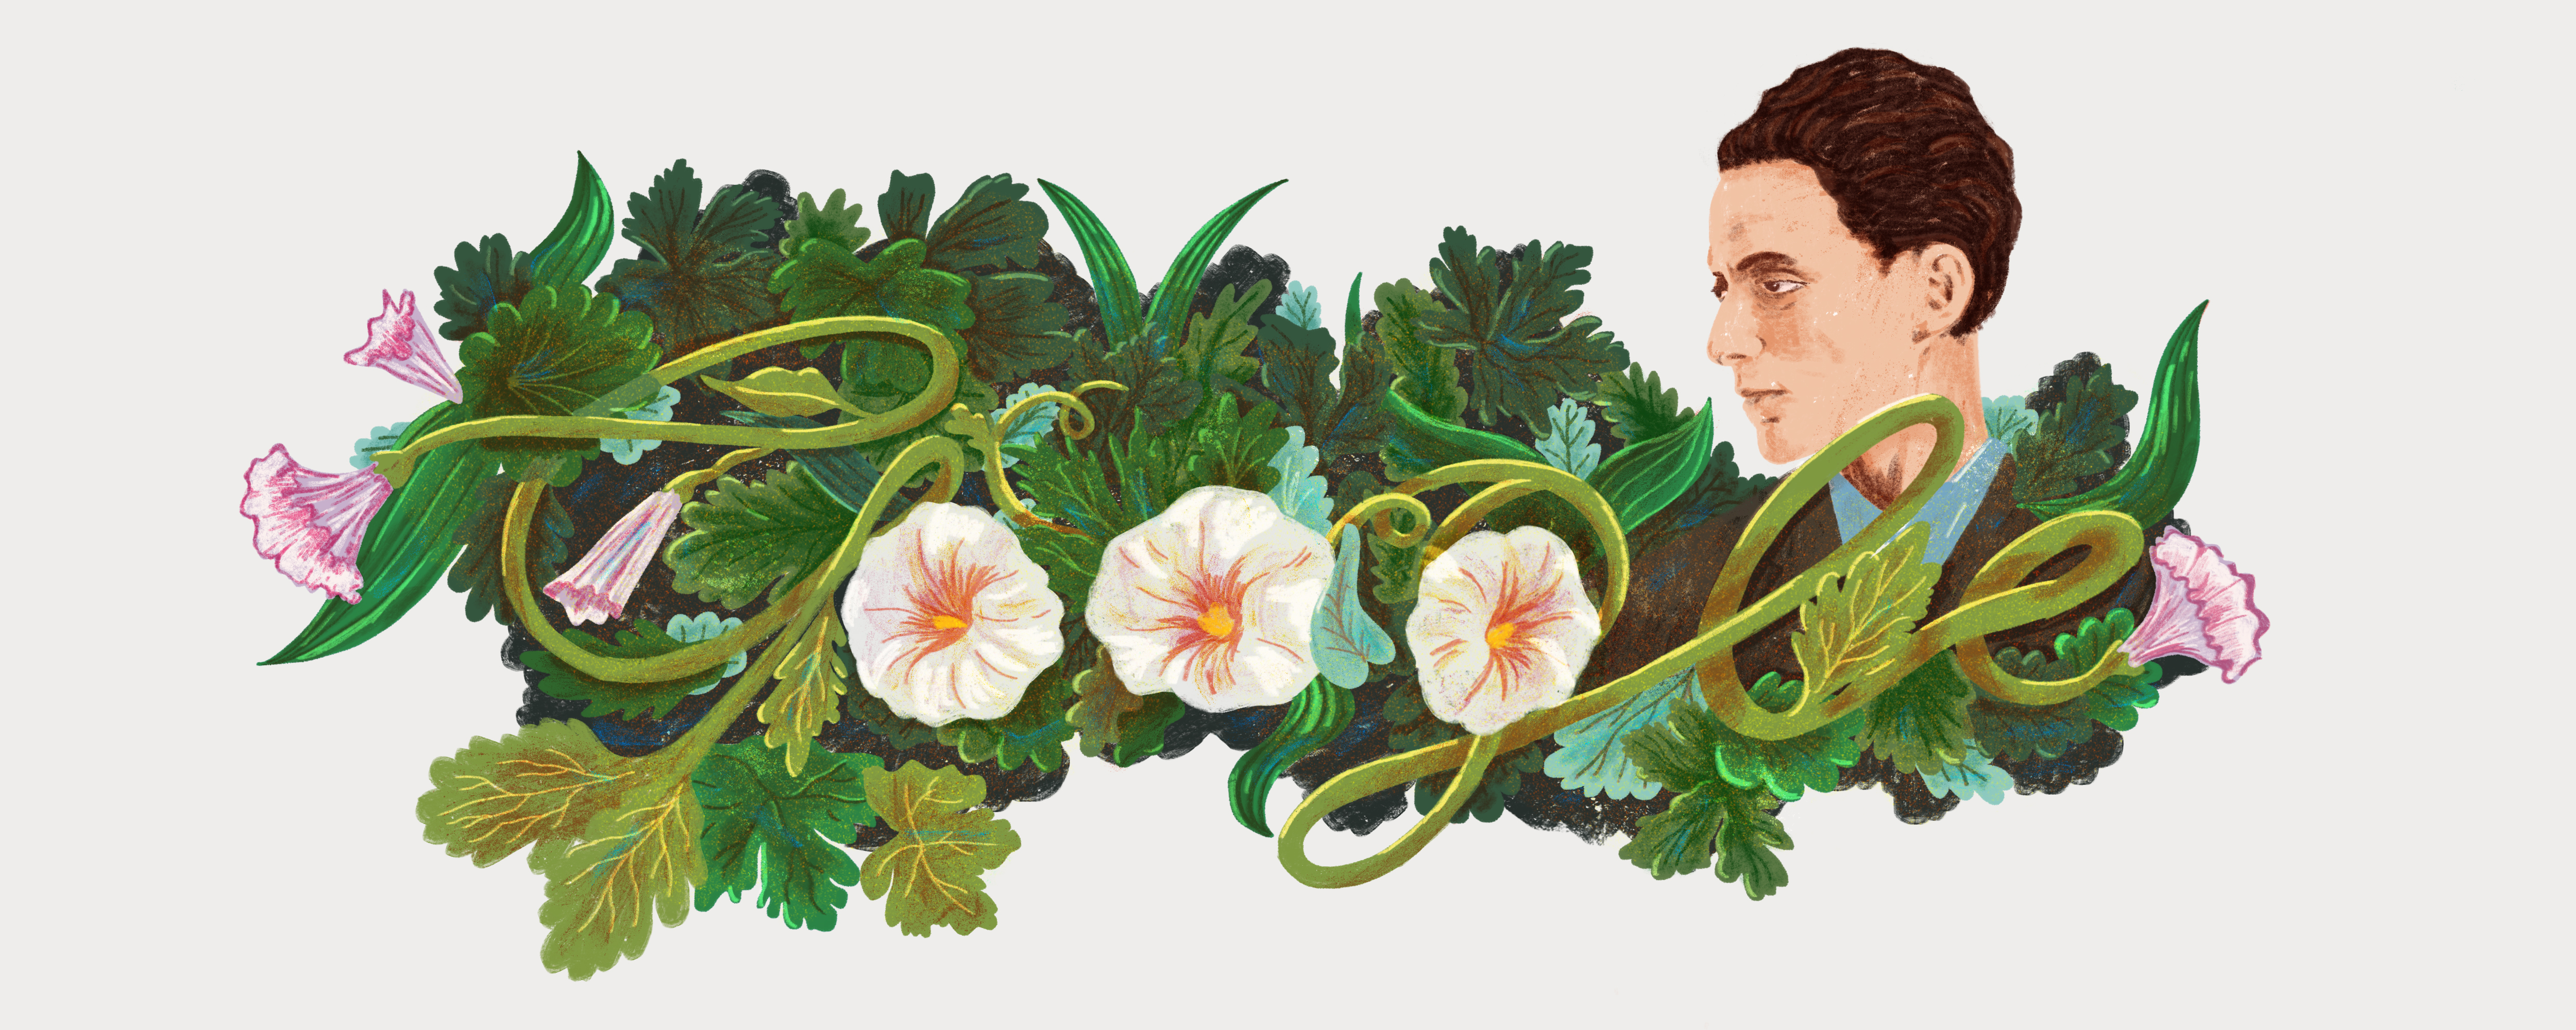 Digital illustration of the Google logo made up of greenery and pink and white flowers. There is an profile-view illustration of Gluck in the top right hand corner. Gluck has fair skin, short dark brown hair, and has a serious look on their face. They are wearing a light blue collared shirt under a brown blazer.